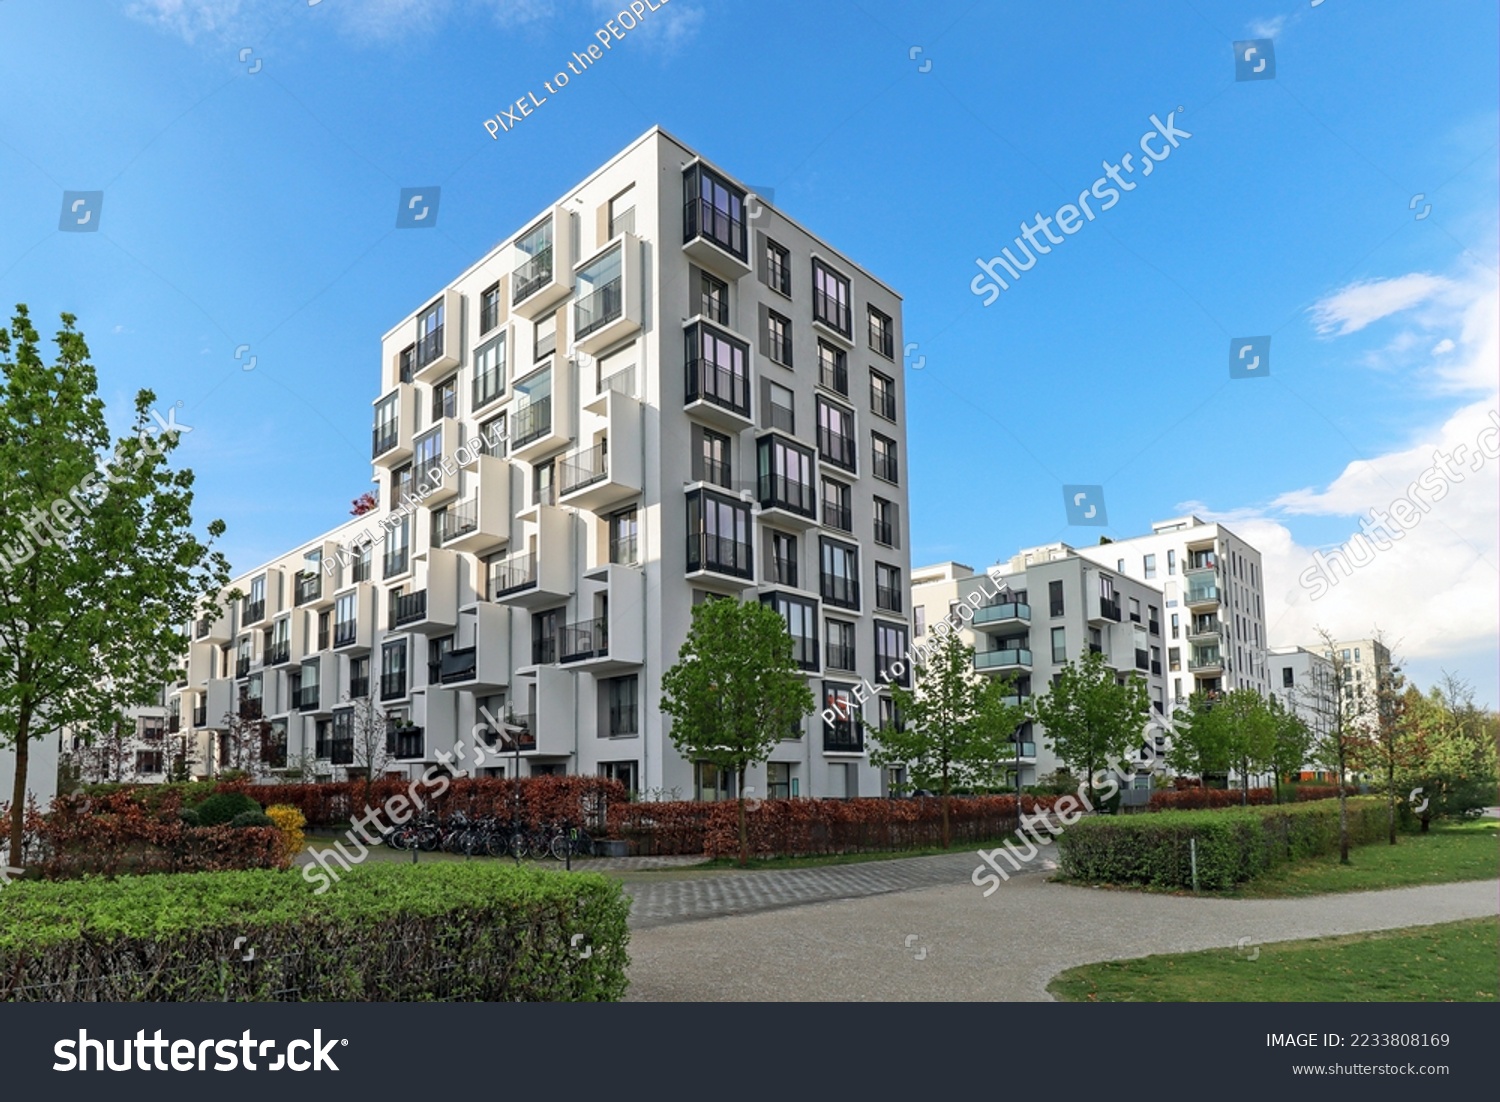 Cityscape of a residential area with modern apartment buildings, new green urban landscape in the city #2233808169